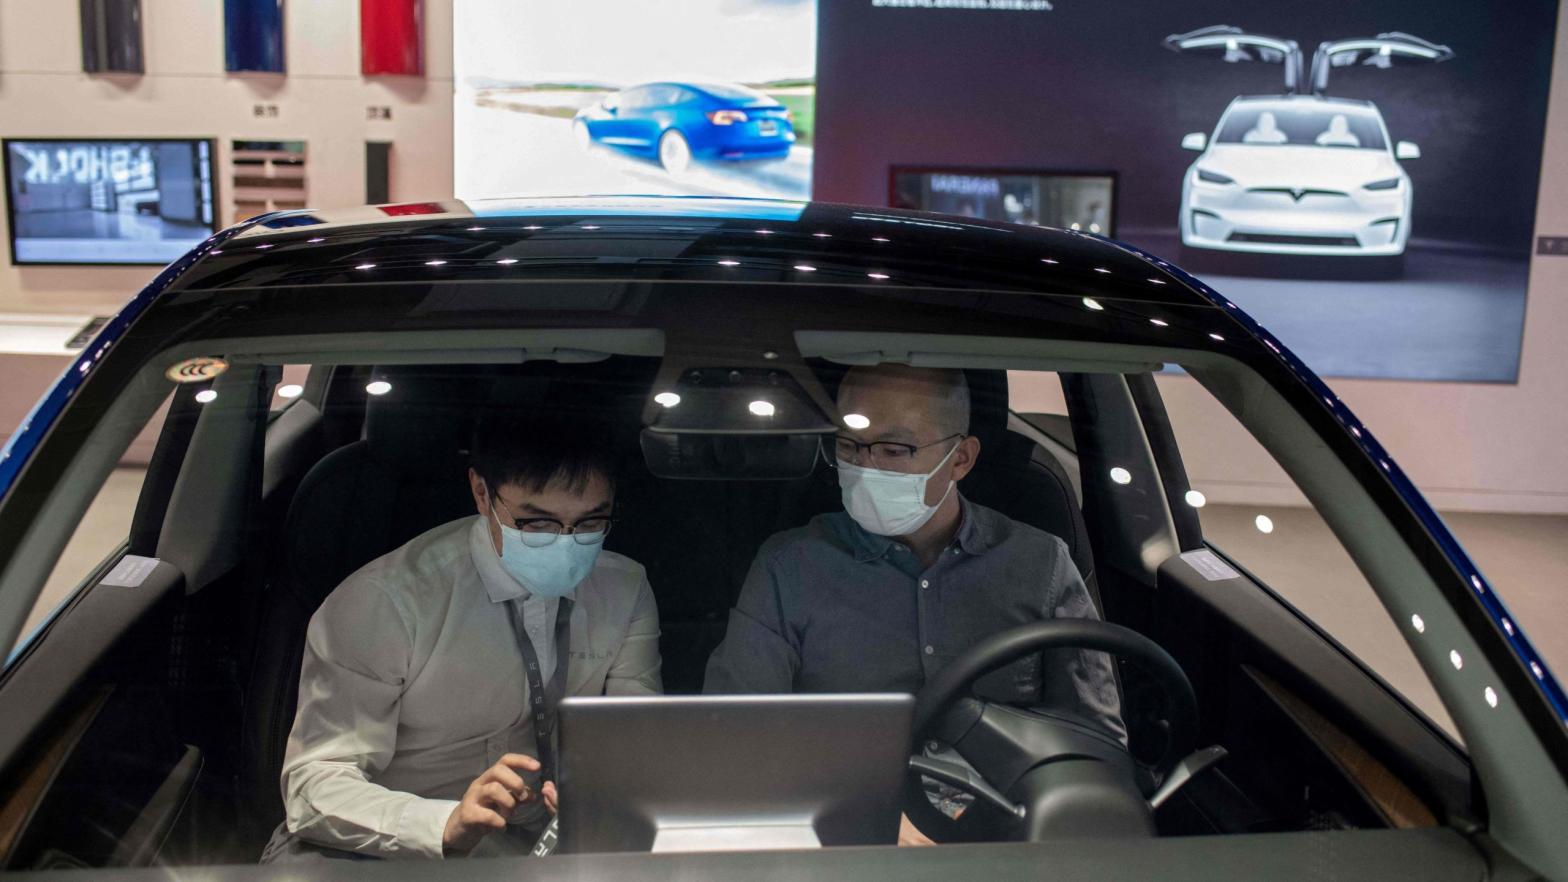 A man sits inside of a Tesla car Model 3 as a vendor talks to him at a Tesla shop inside of a shopping mall in Beijing on May 26, 2021.  (Photo: Nicolas Asfouri/AFP, Getty Images)